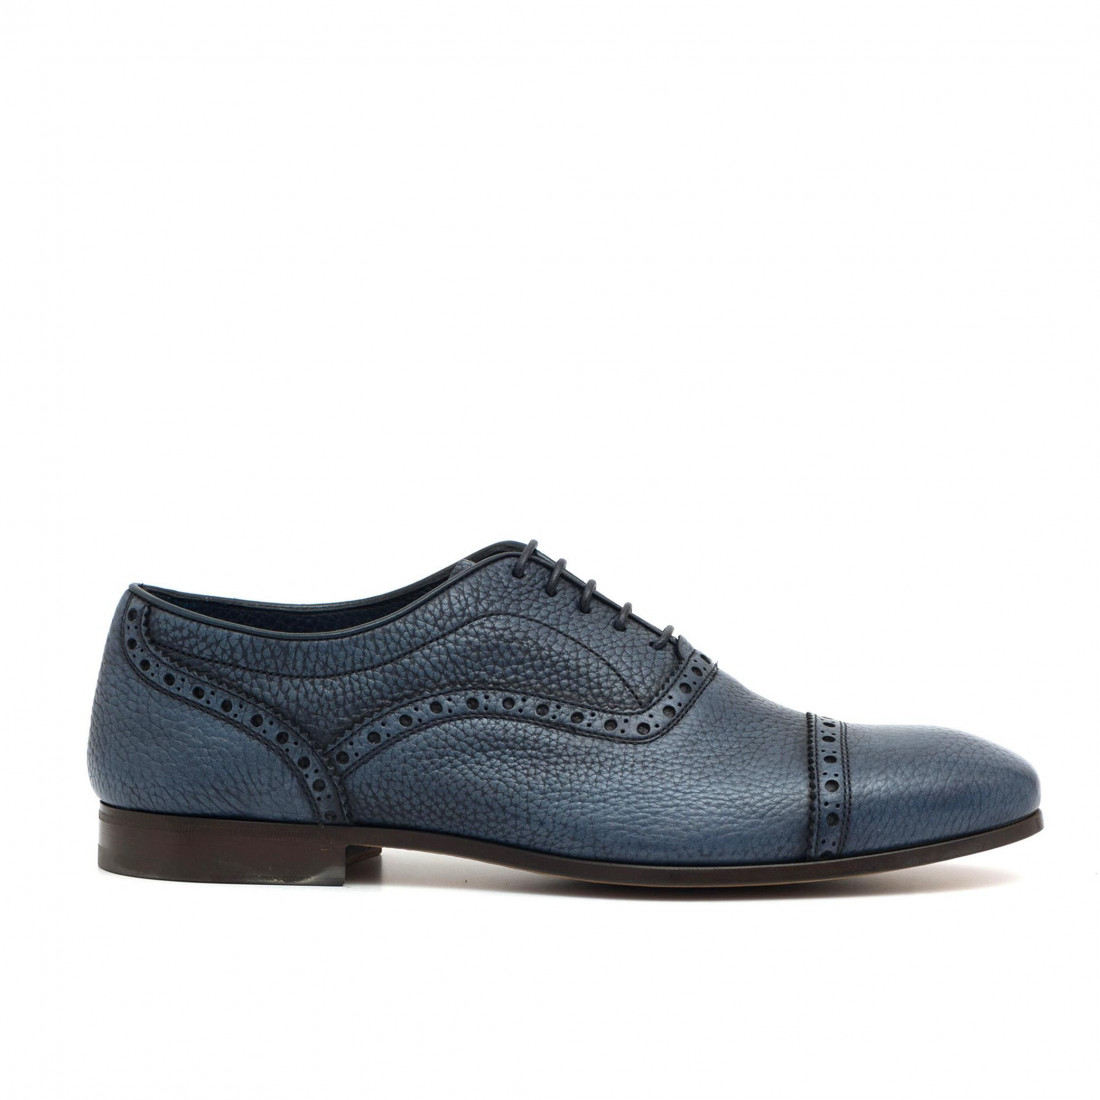 Oxford shoes in very soft antique-effect ocean leather